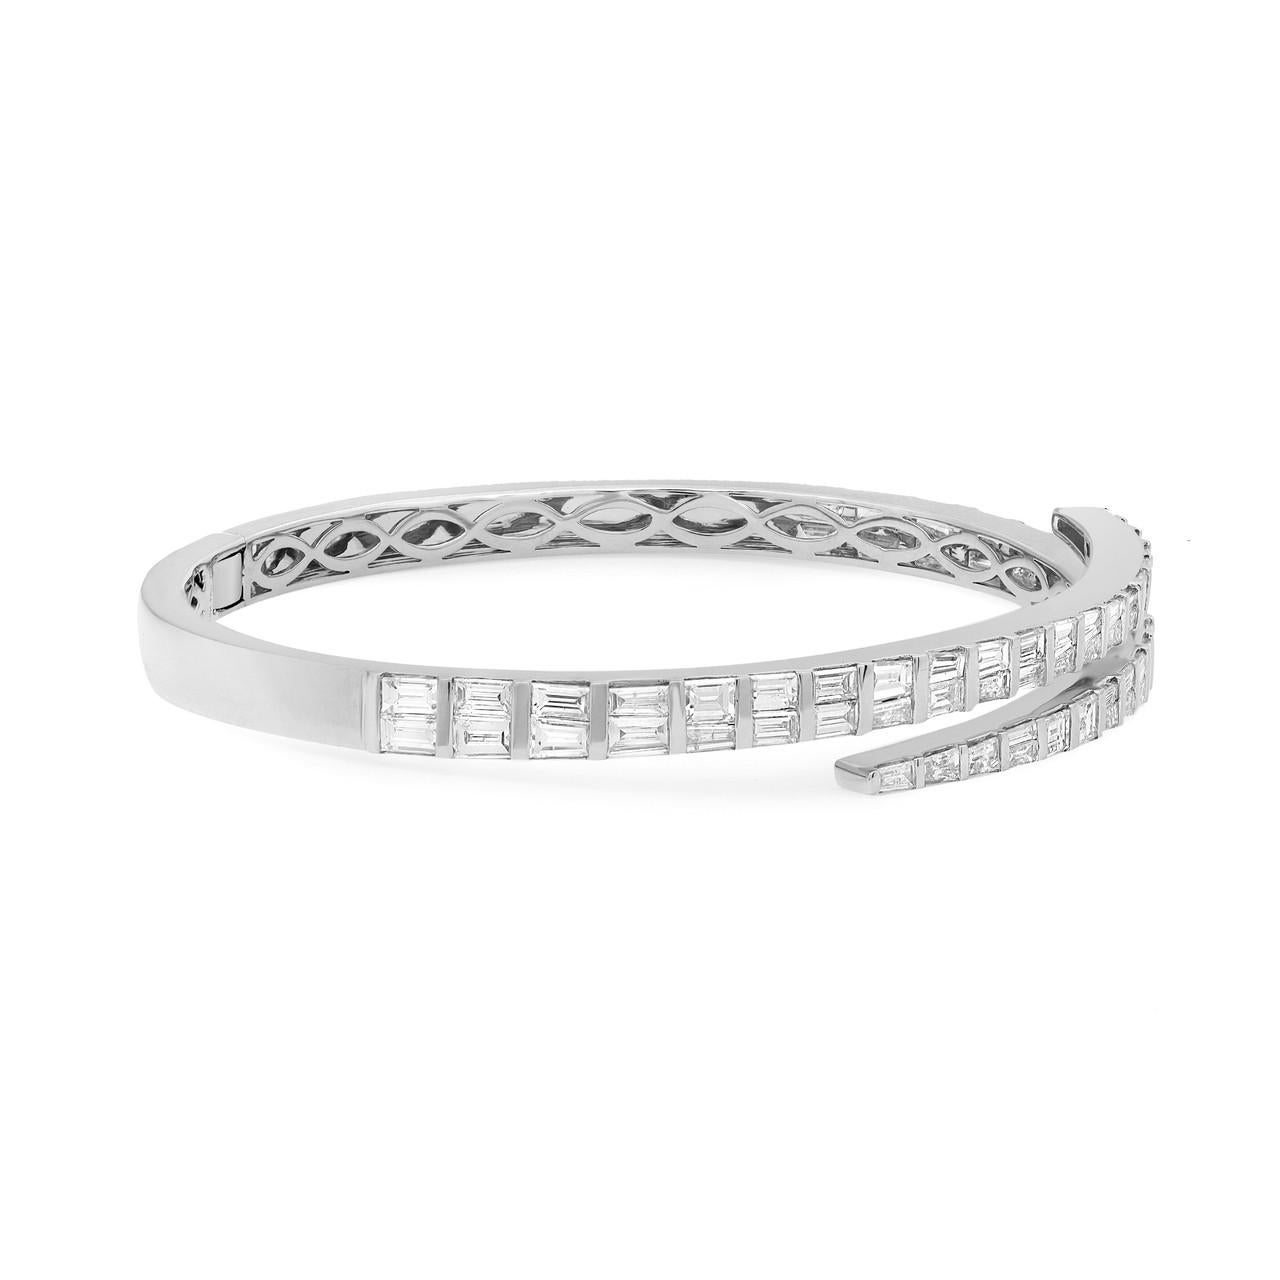 4.27 Carat Baguette Cut Diamond Bangle Bracelet 18K White Gold In New Condition For Sale In New York, NY